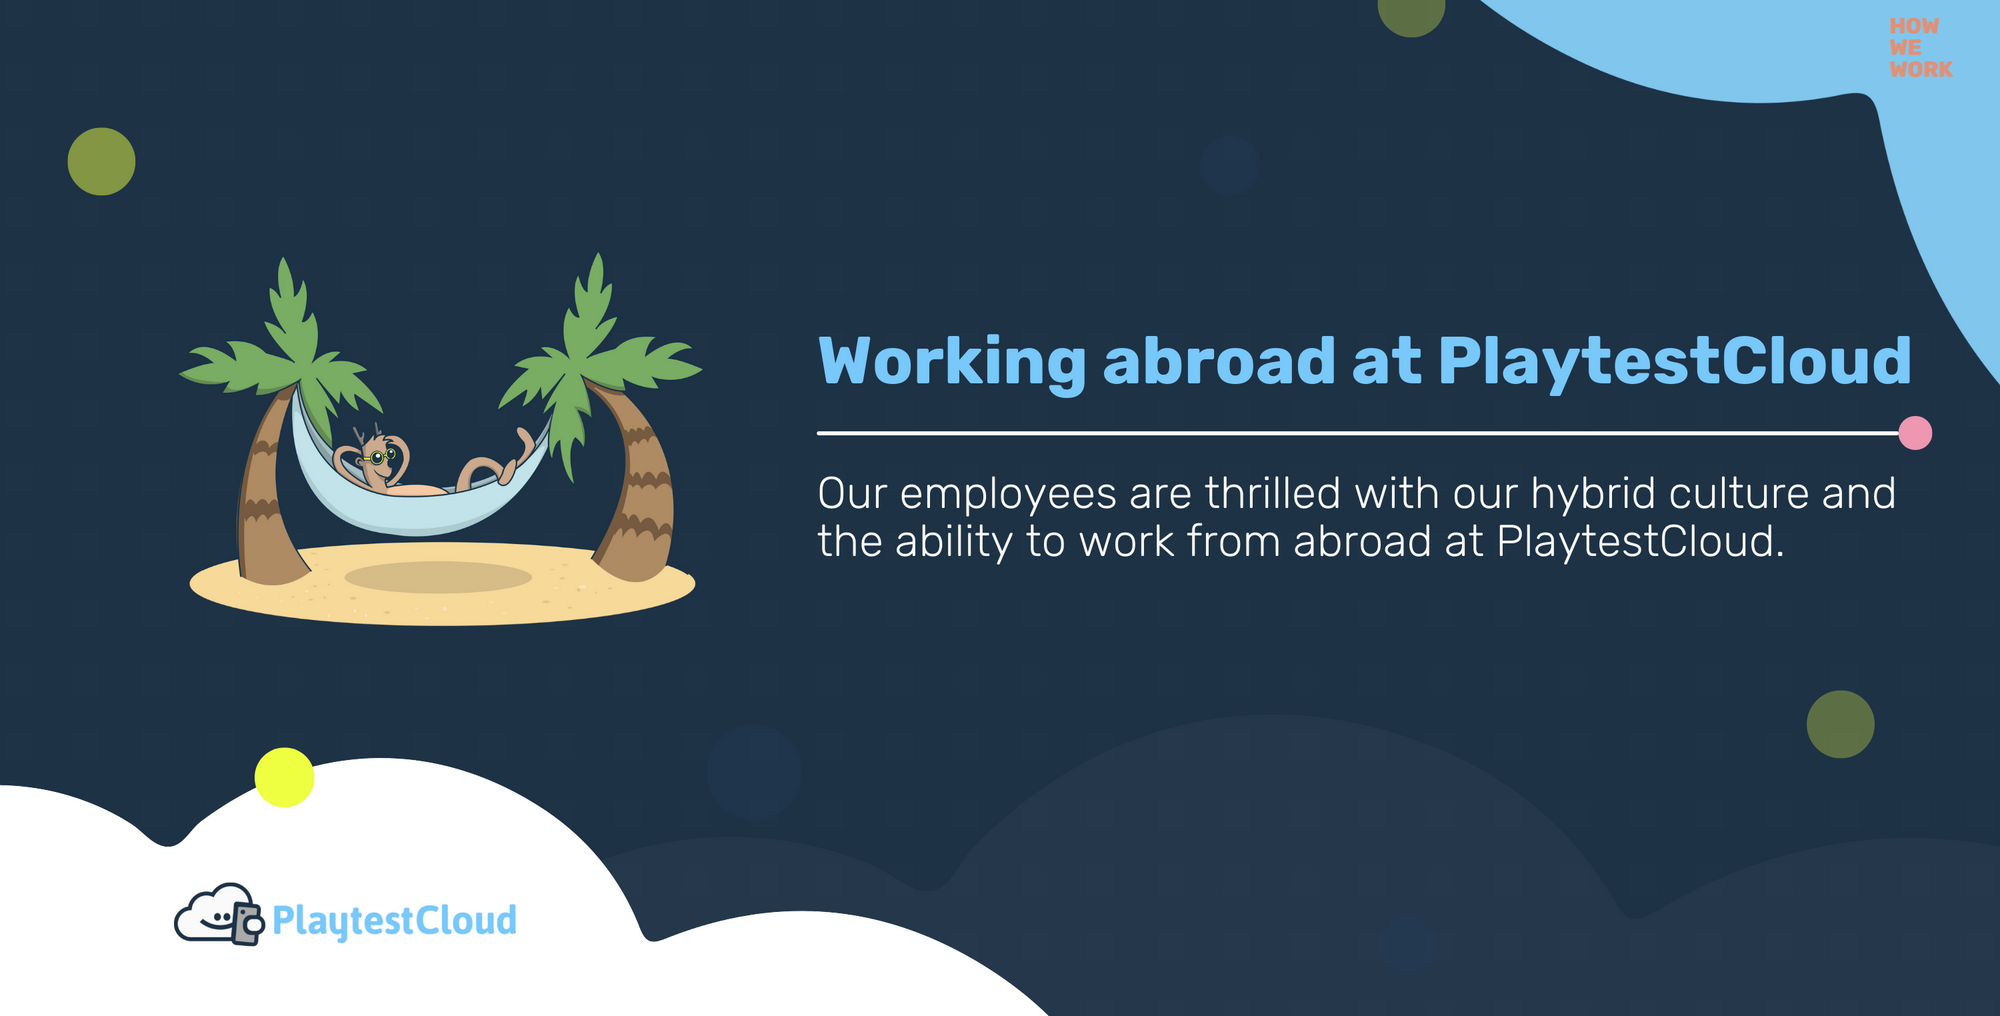 Hybrid culture & working abroad at PlaytestCloud